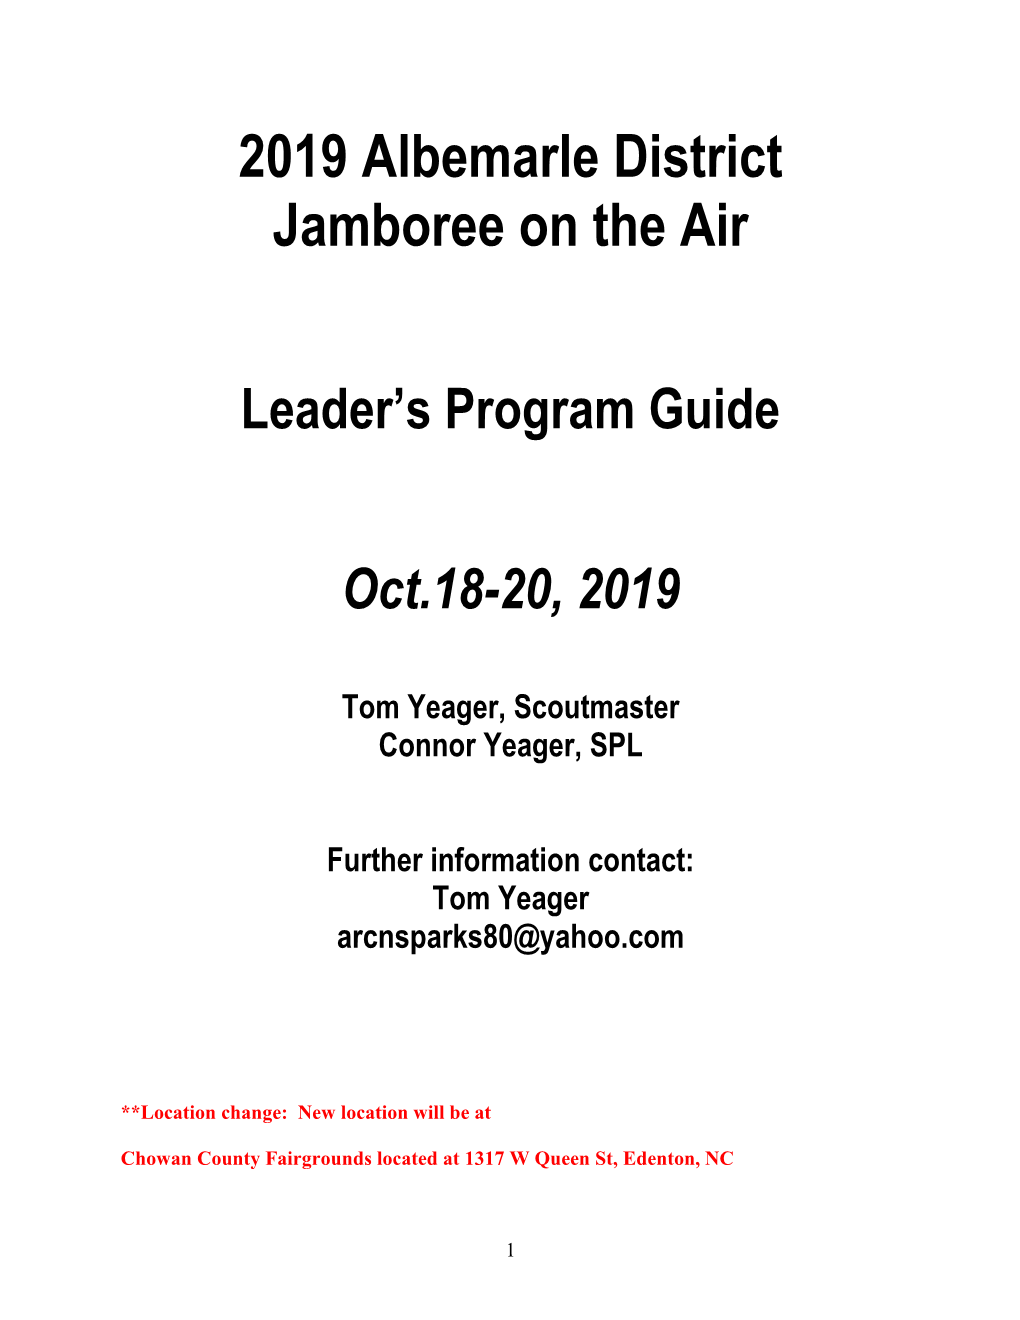 Camporee Leaders Guide